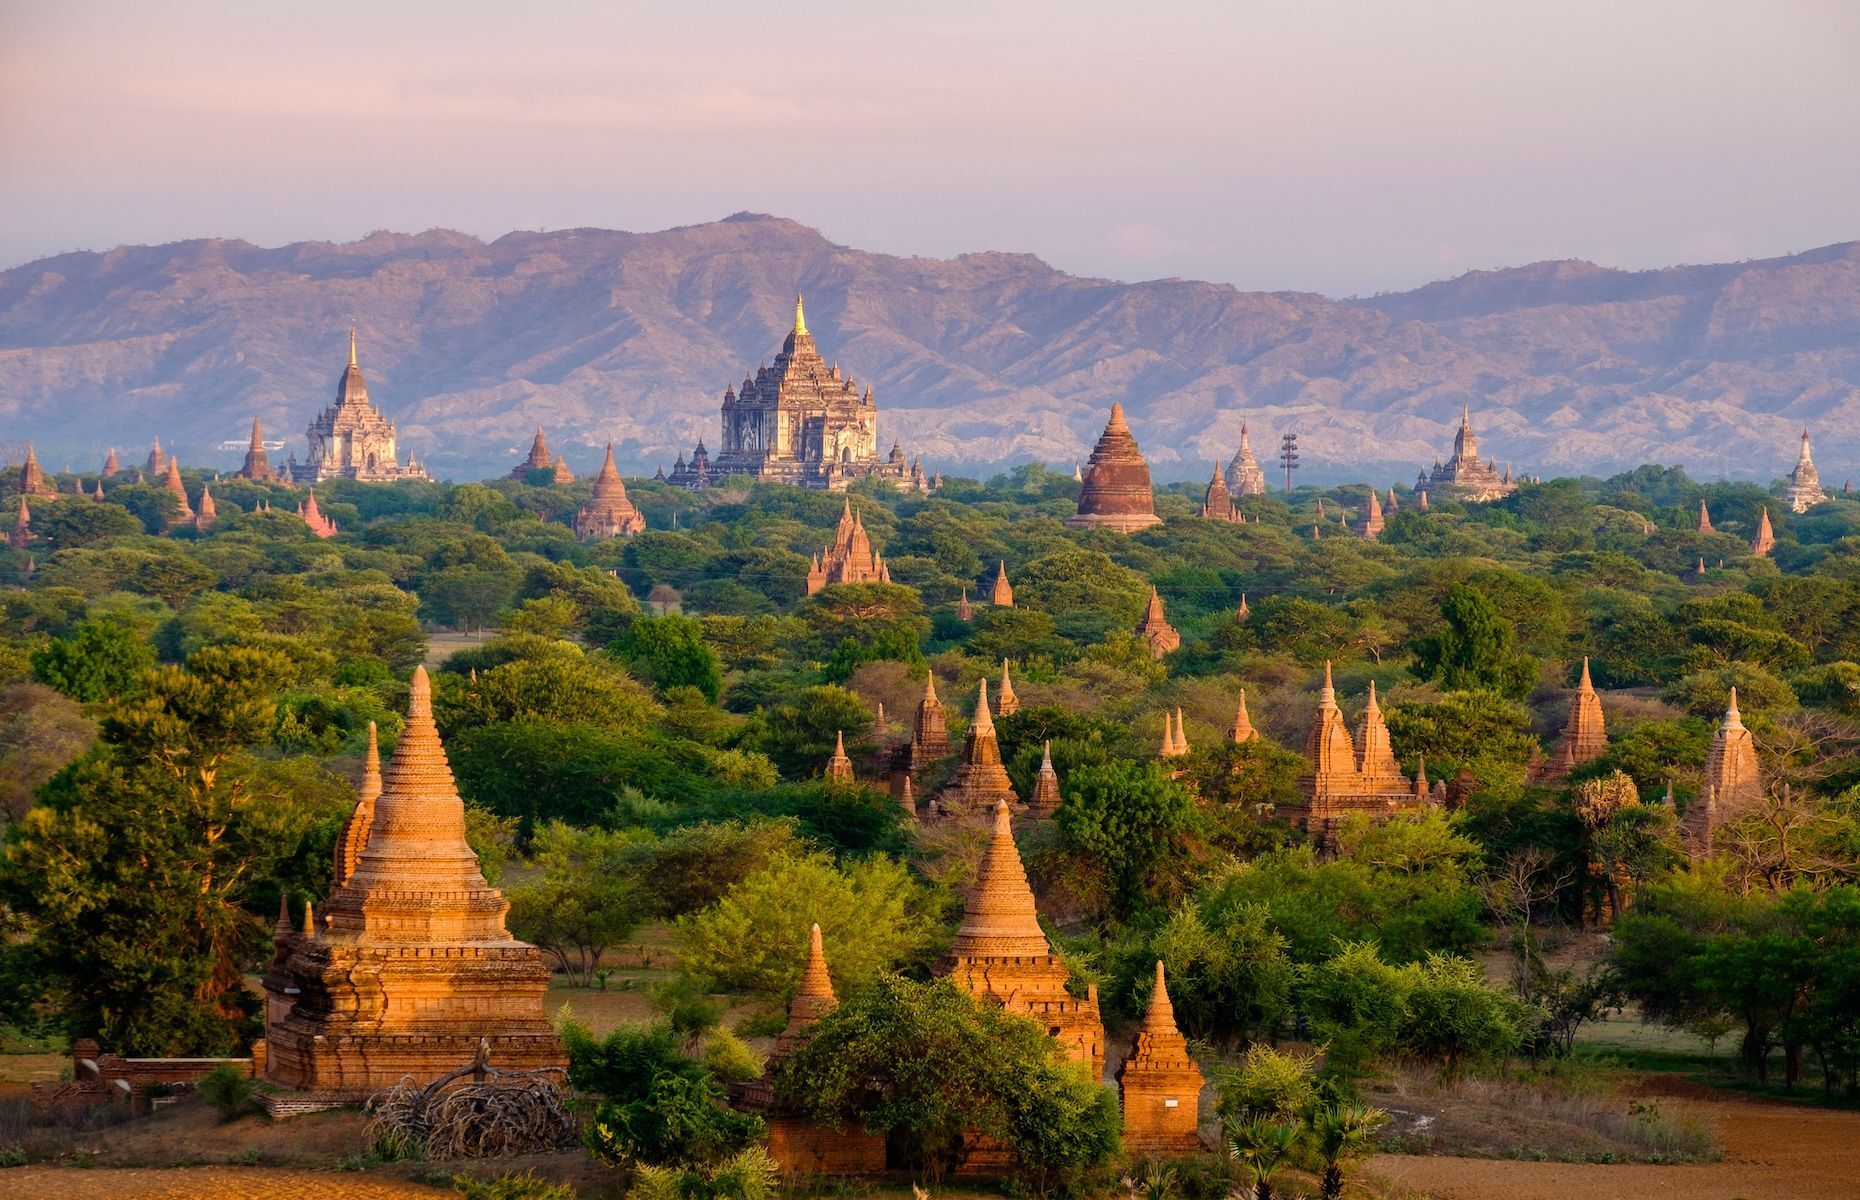 <p>The enigmatic city of <a href="https://www.theatlantic.com/photo/2019/07/bagan-myanmar-photos/594985/" class="atom_link atom_valid" rel="noreferrer noopener">Bagan</a> is an extraordinary archaeological site featuring thousands of temples scattered over a vast territory in the heart of Myanmar. Visit historical monuments like the Ananda and Dhammayangyi Temples and don’t forget to book a cruise on the Ayeyarwady River to admire the landscape from a different perspective. For a truly magical experience, climb aboard a hot-air balloon at sunrise or sunset for an incredible view of Bagan—you won’t regret it!</p>